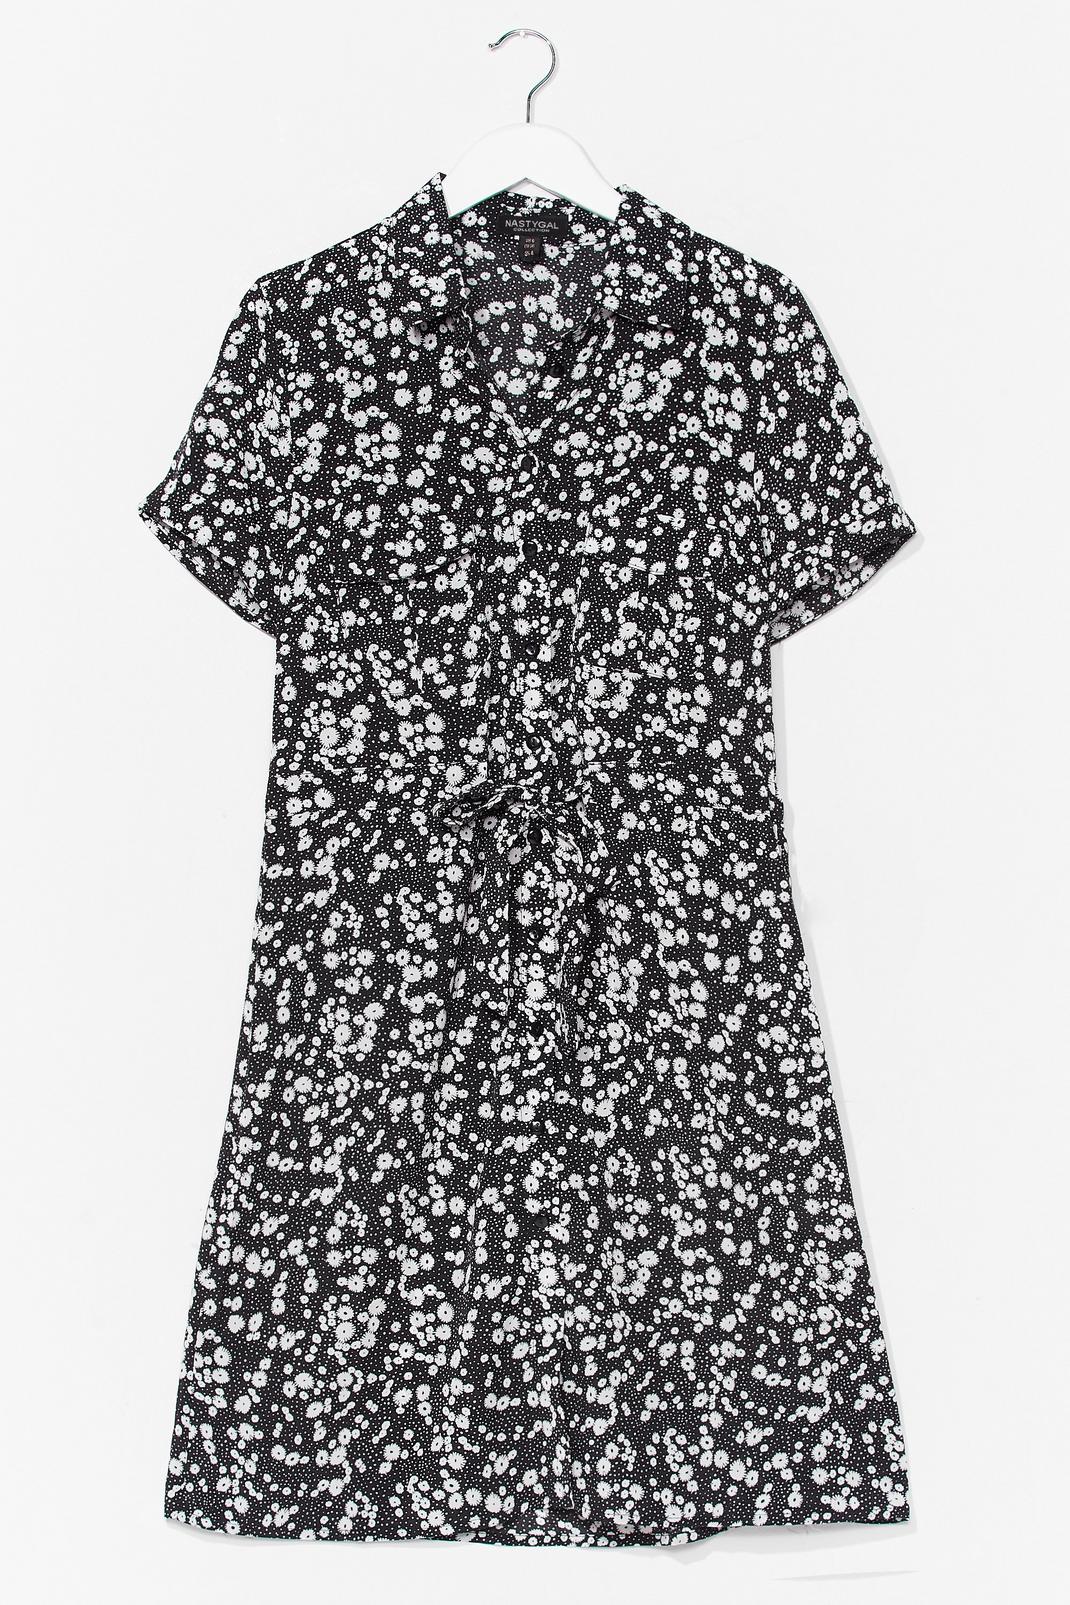 Dry Those Tiers Floral Shirt Dress image number 1